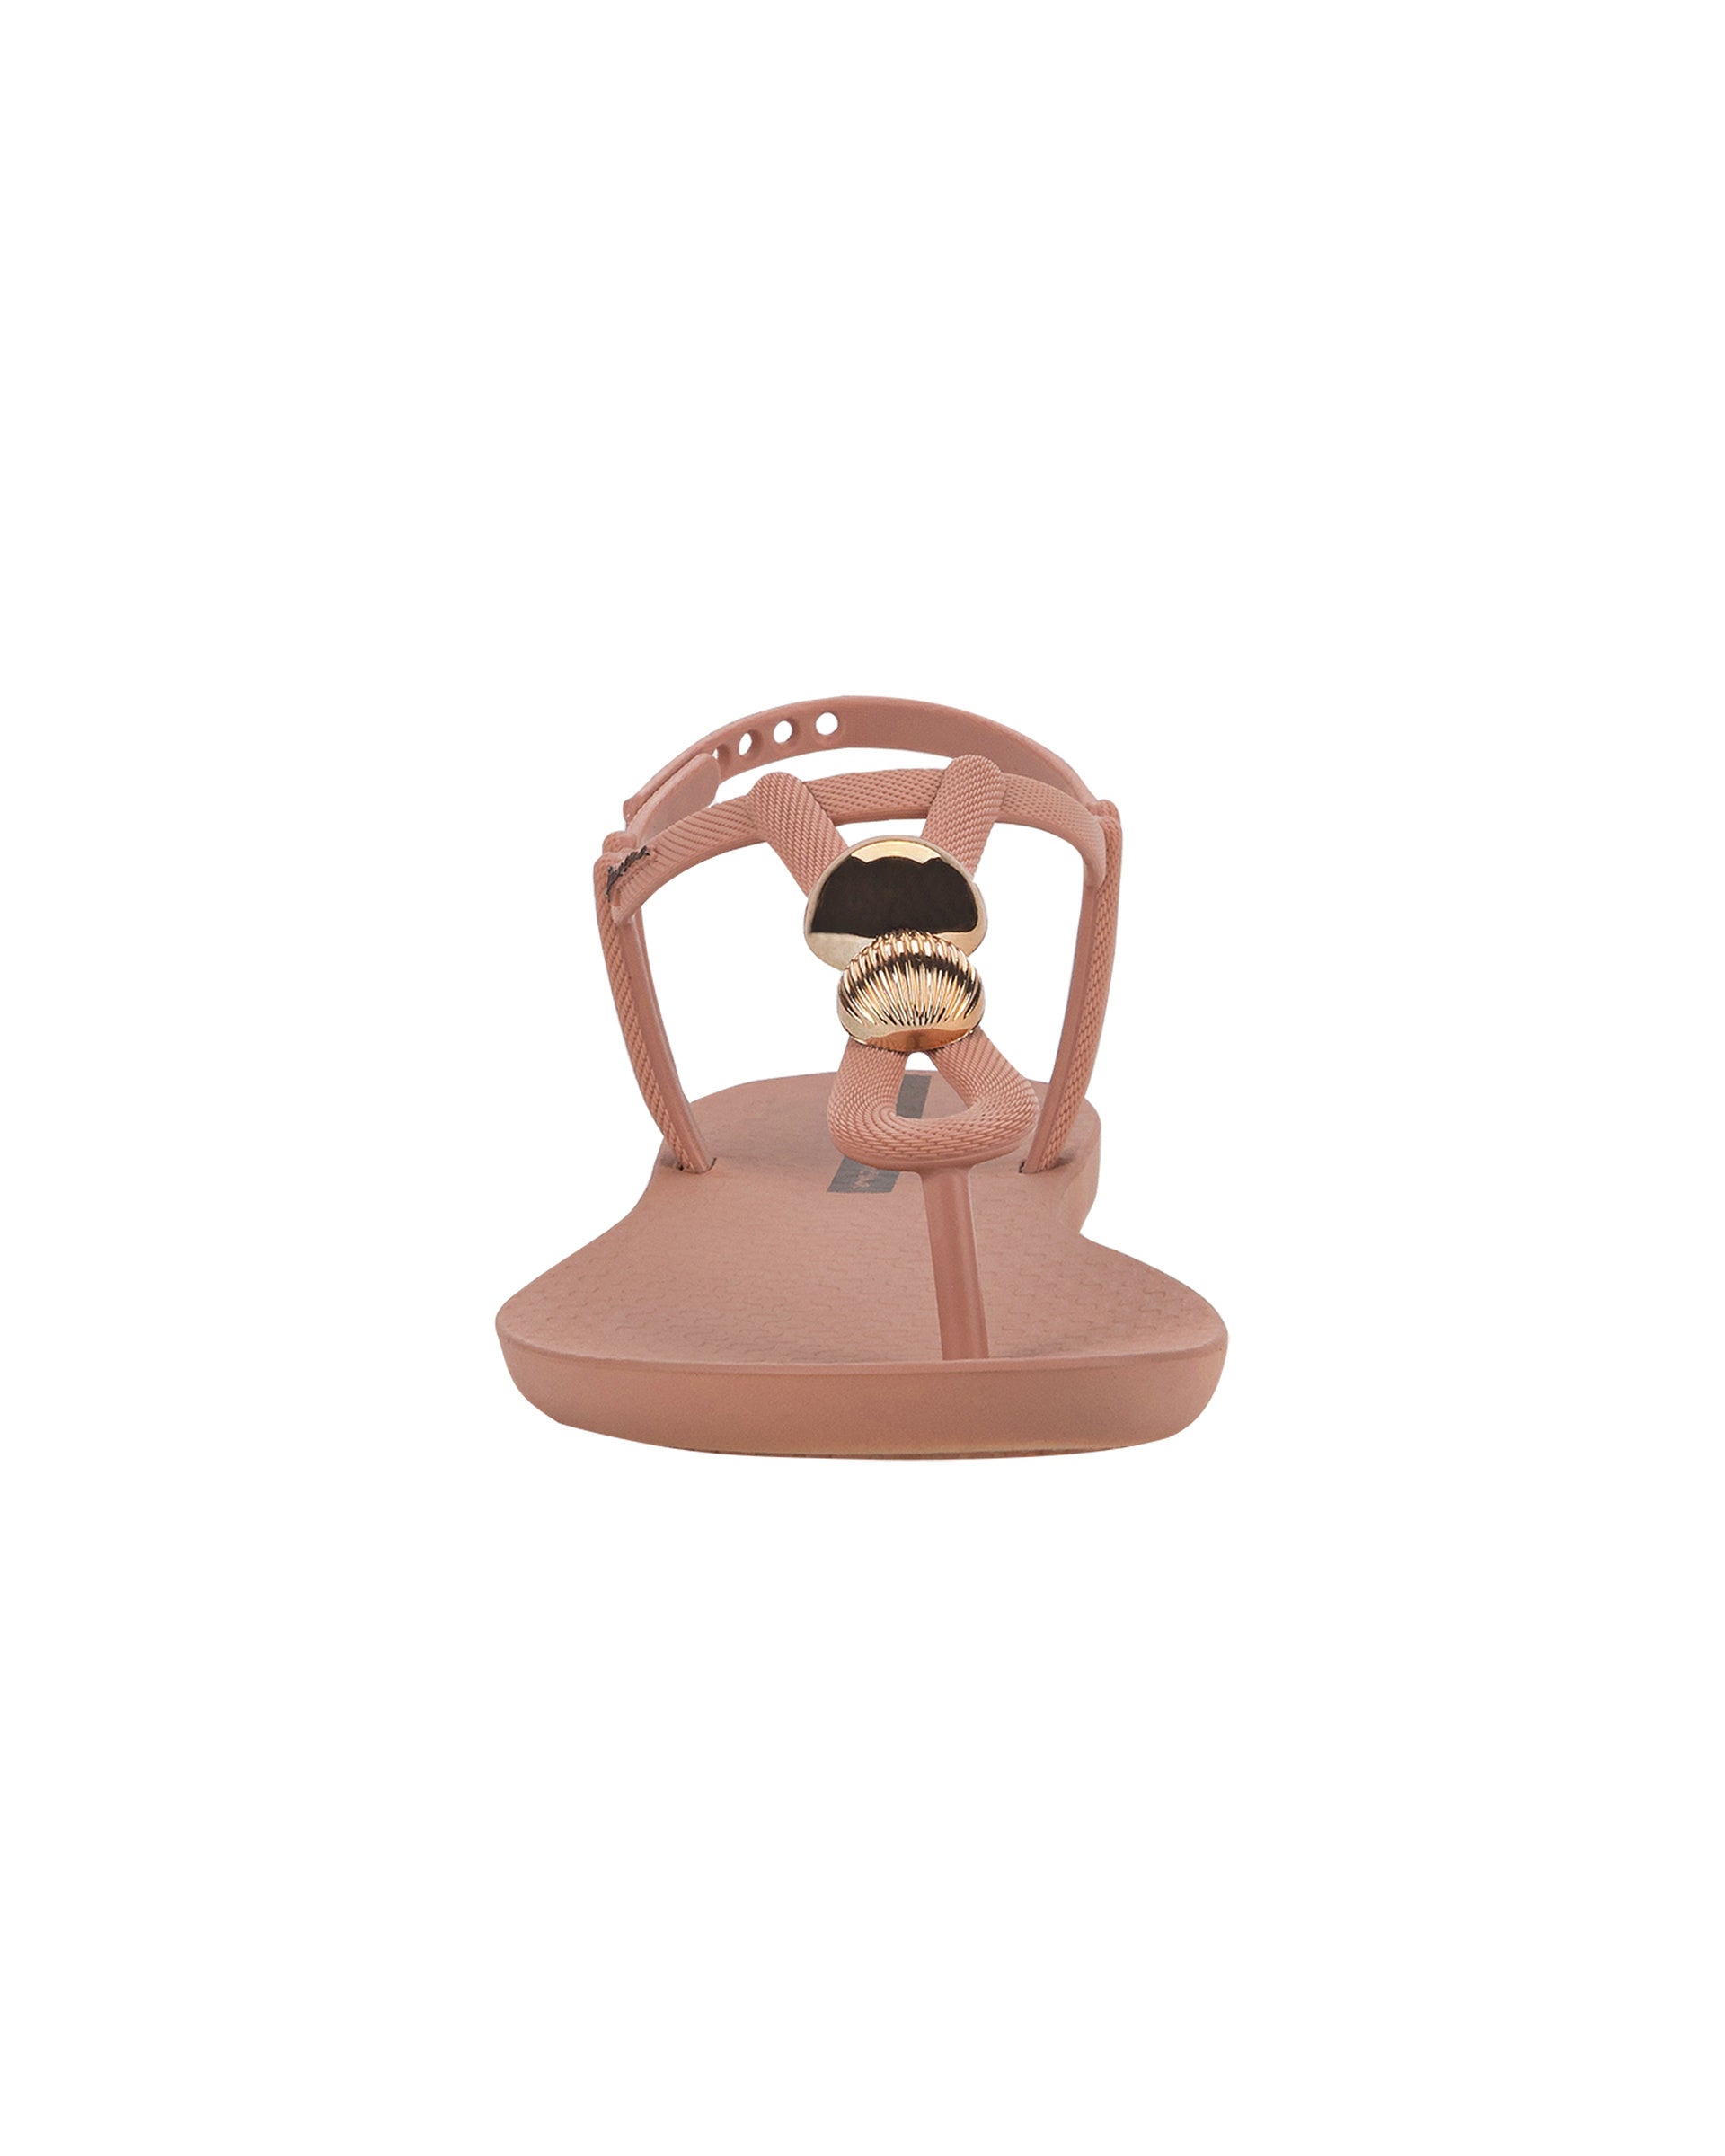 Front view of a light pink Ipanema Class Spheres women's t-strap sandal with metallic bauble.